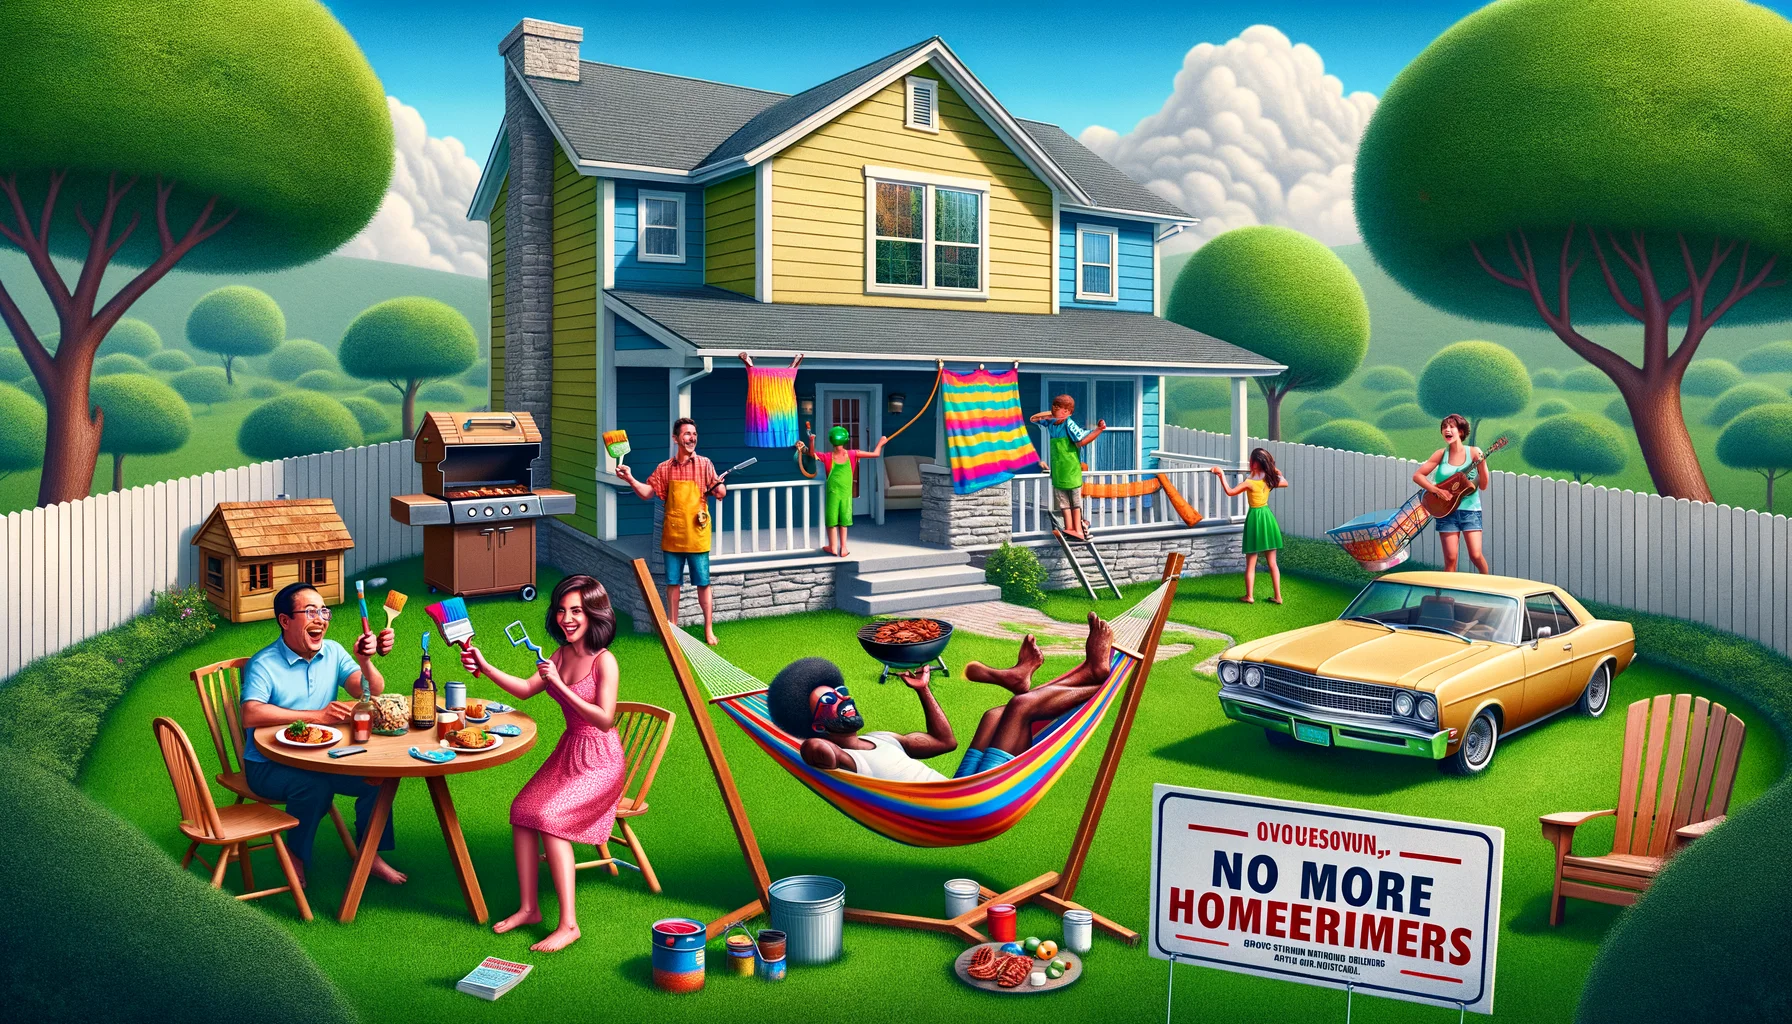 Create a humorously exaggerated scene showcasing the perks of home ownership in an ideal scenario. Imagine a pristine suburban house with a flawless green lawn. A happy caucasian woman is repainting the front door with bright colors of her choice, a black man is grilling delectable barbecue in the backyard, and two Hispanic children are playing in the treehouse they've built. Meanwhile, a South-Asian man is relaxed in a hammock hanging between two trees, reading a book titled 'No More Rent!'. A sign on the lawn proudly declares 'Proud Homeowners'. 